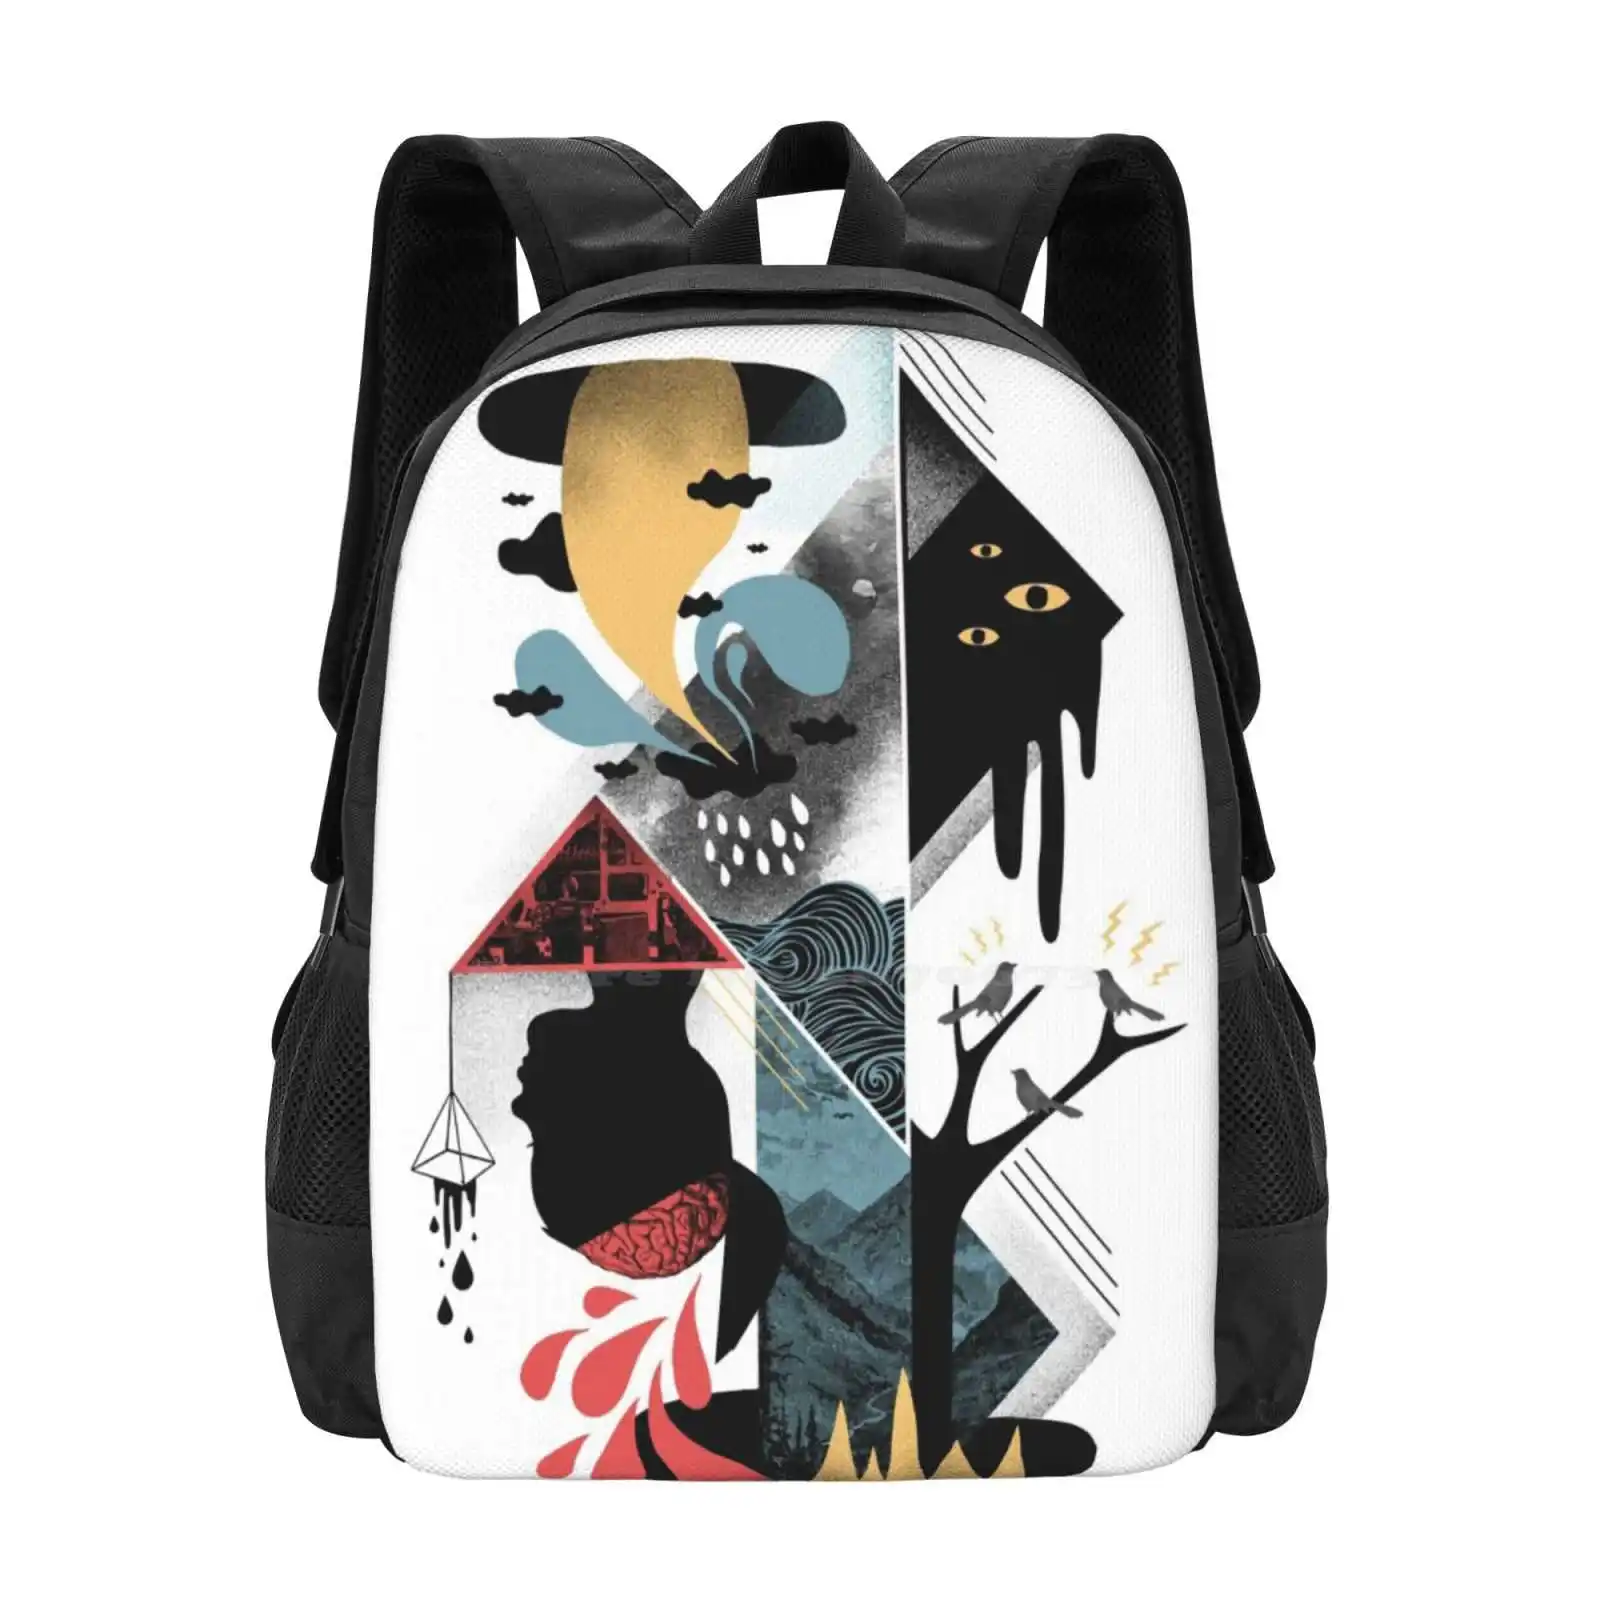 

Shapes And Nightmares Pattern Design Bag Student'S Backpack Surreal Abstract Collage Shapes Nightmares Swirls Birds Clouds